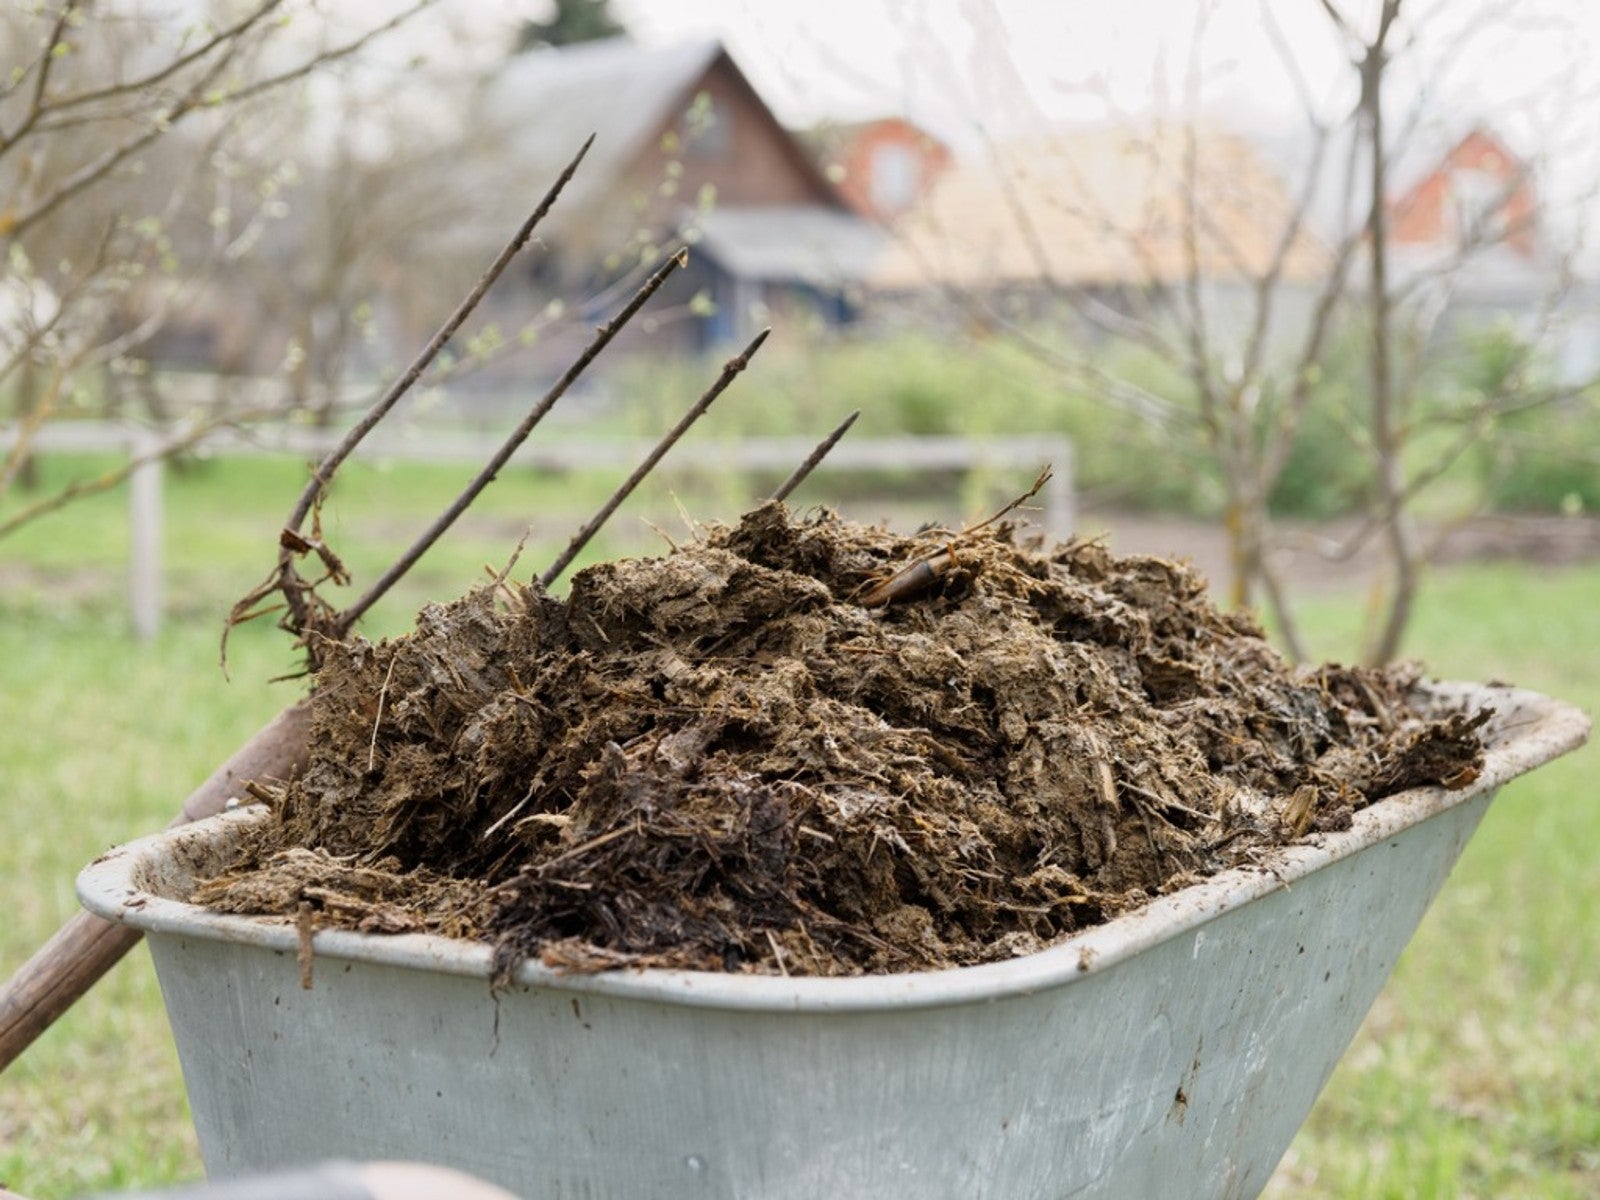 A wheelbarrow full of manure sits with a pitchfork leaning against it